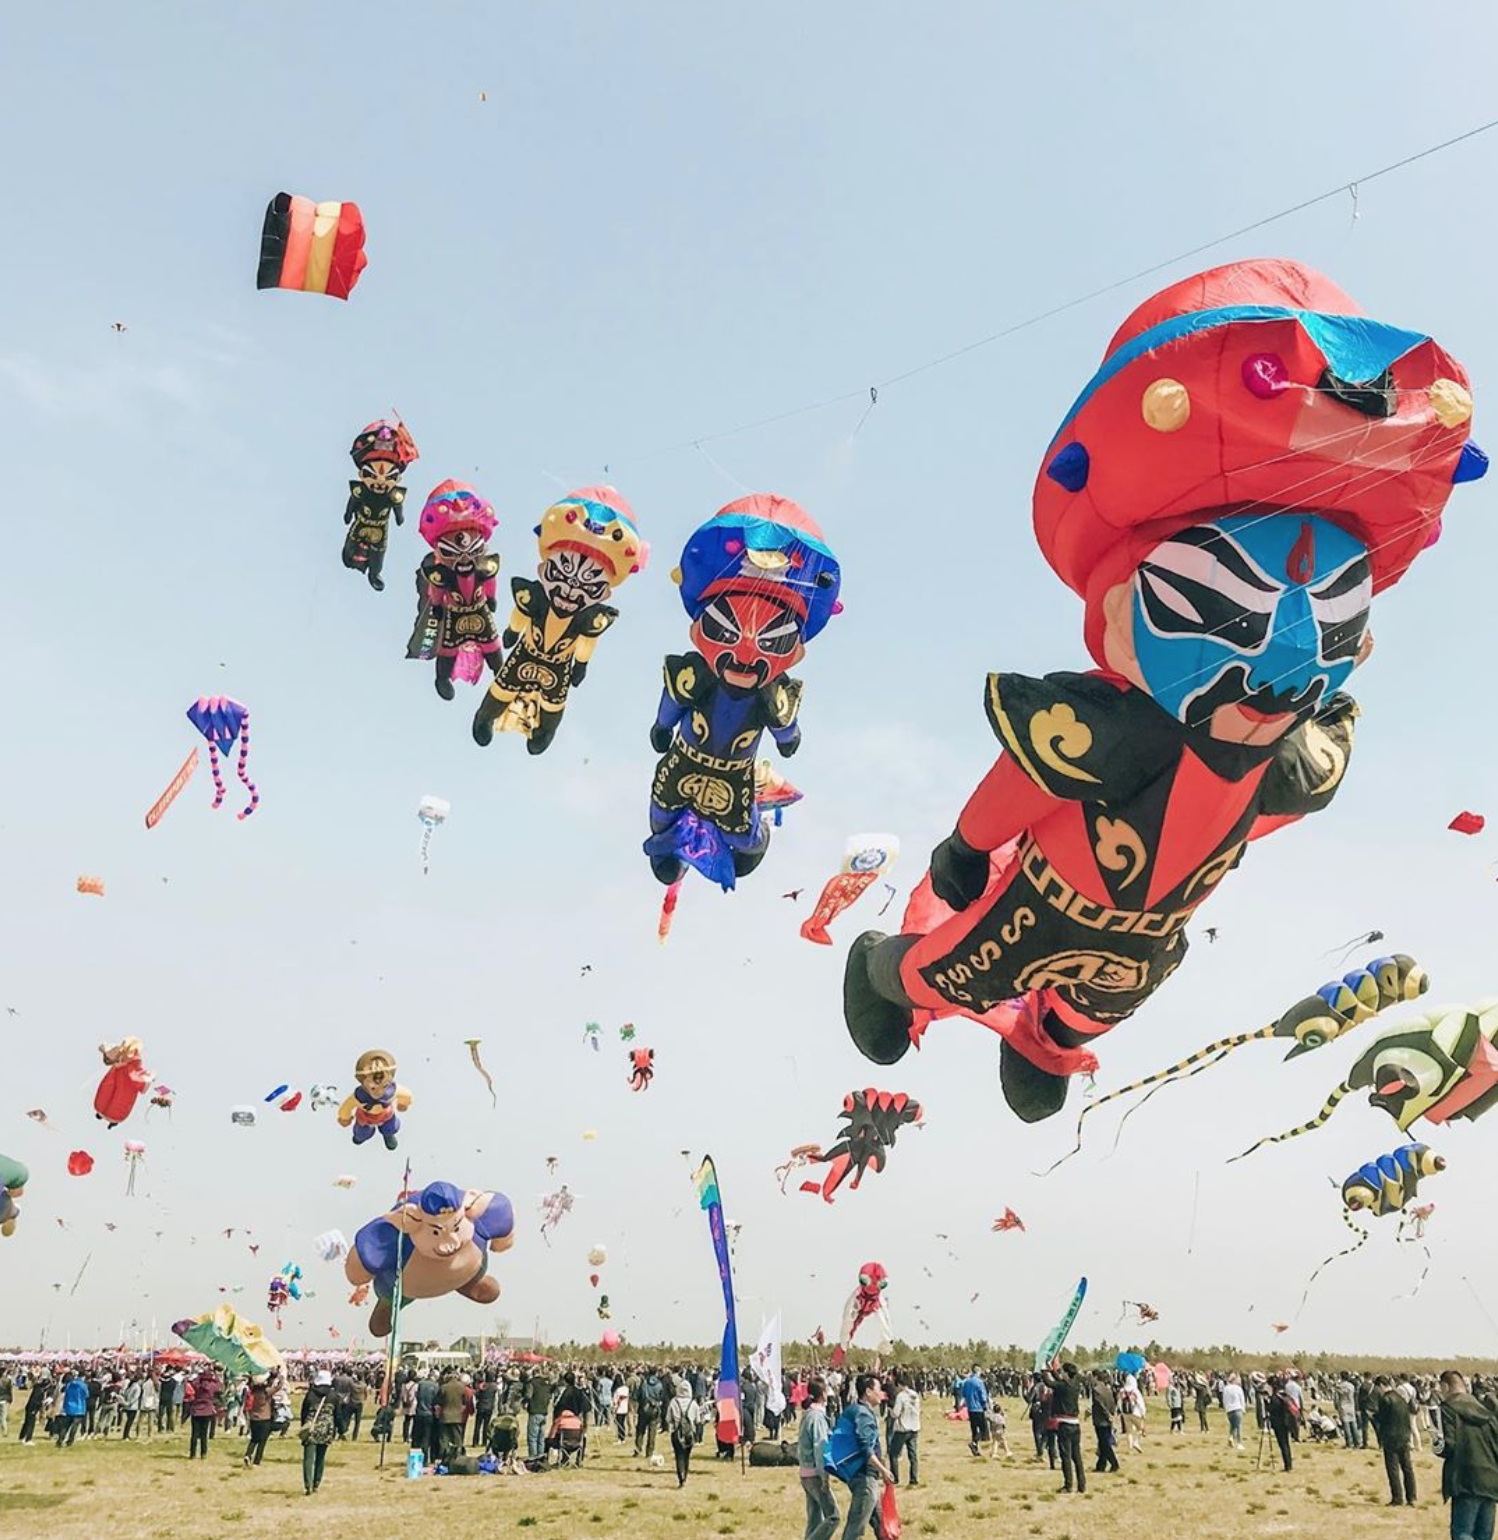 See The World’s Biggest Kite Festival In Weifang, China